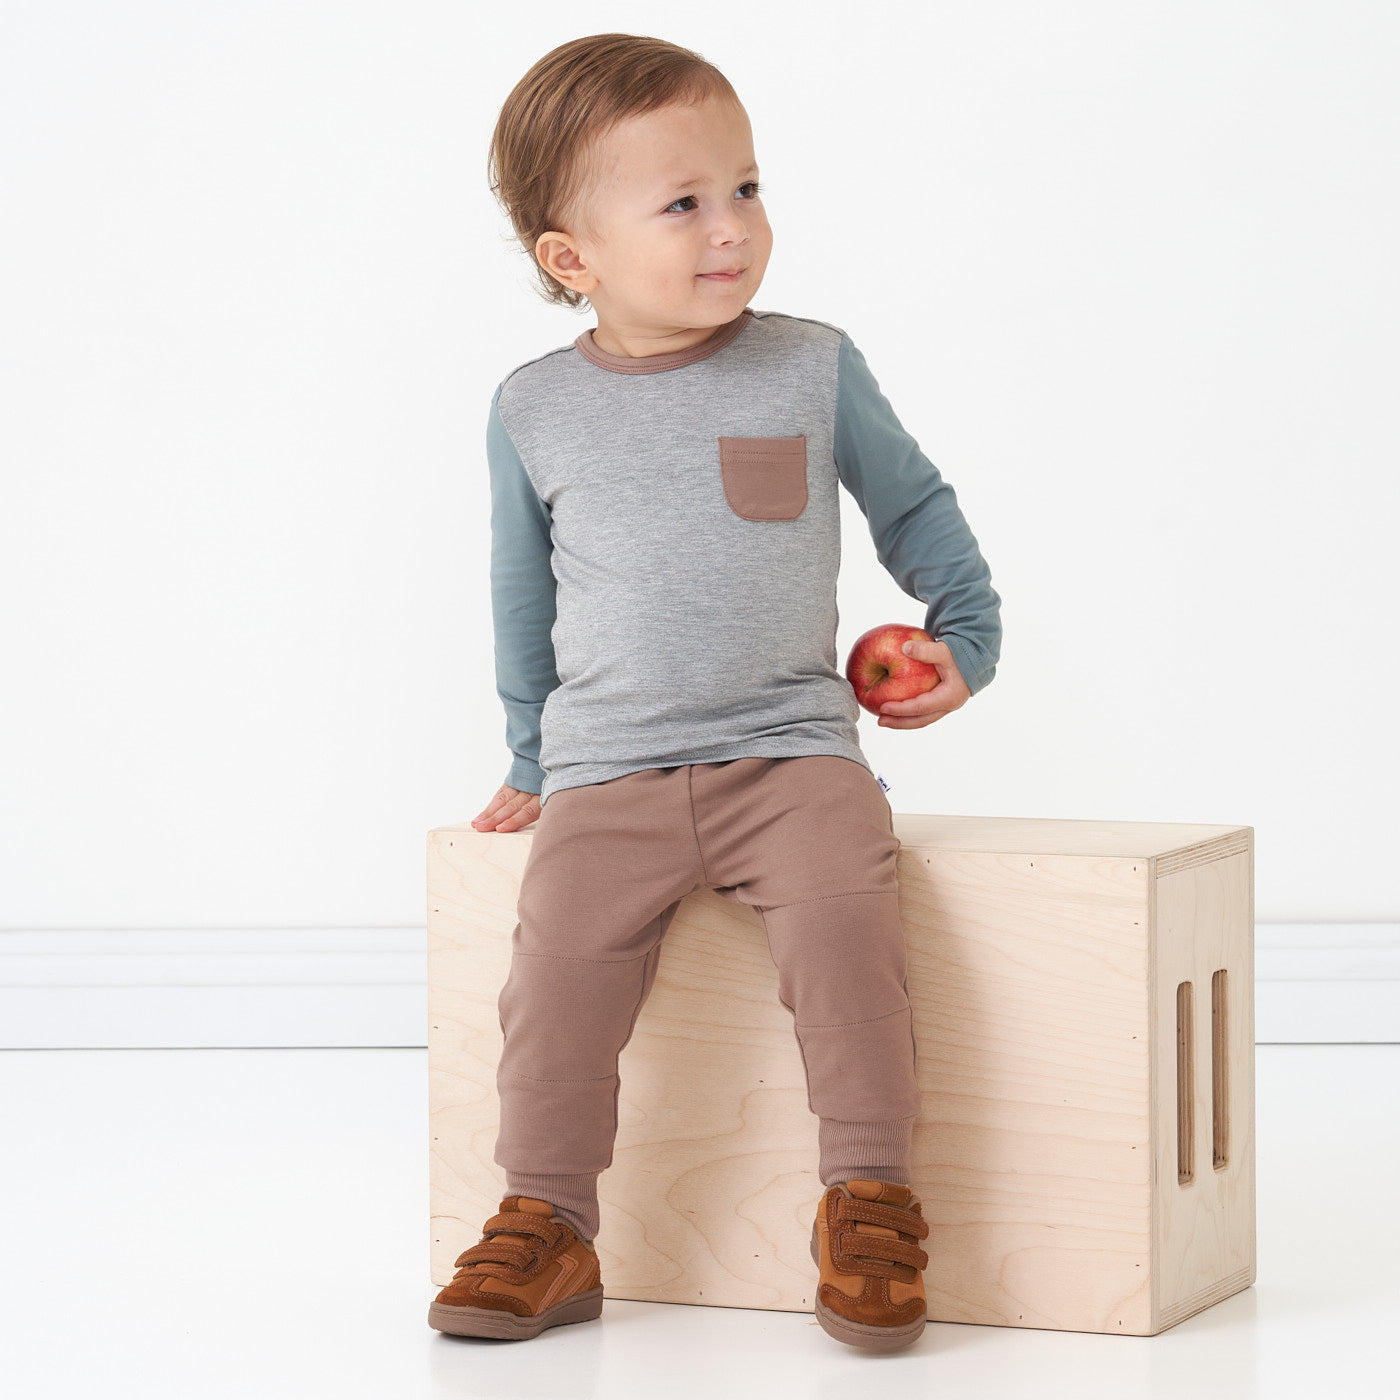 Alternate image of a child sitting on a bench wearing a Colorblock Pocket tee paired with Light Cocoa joggers